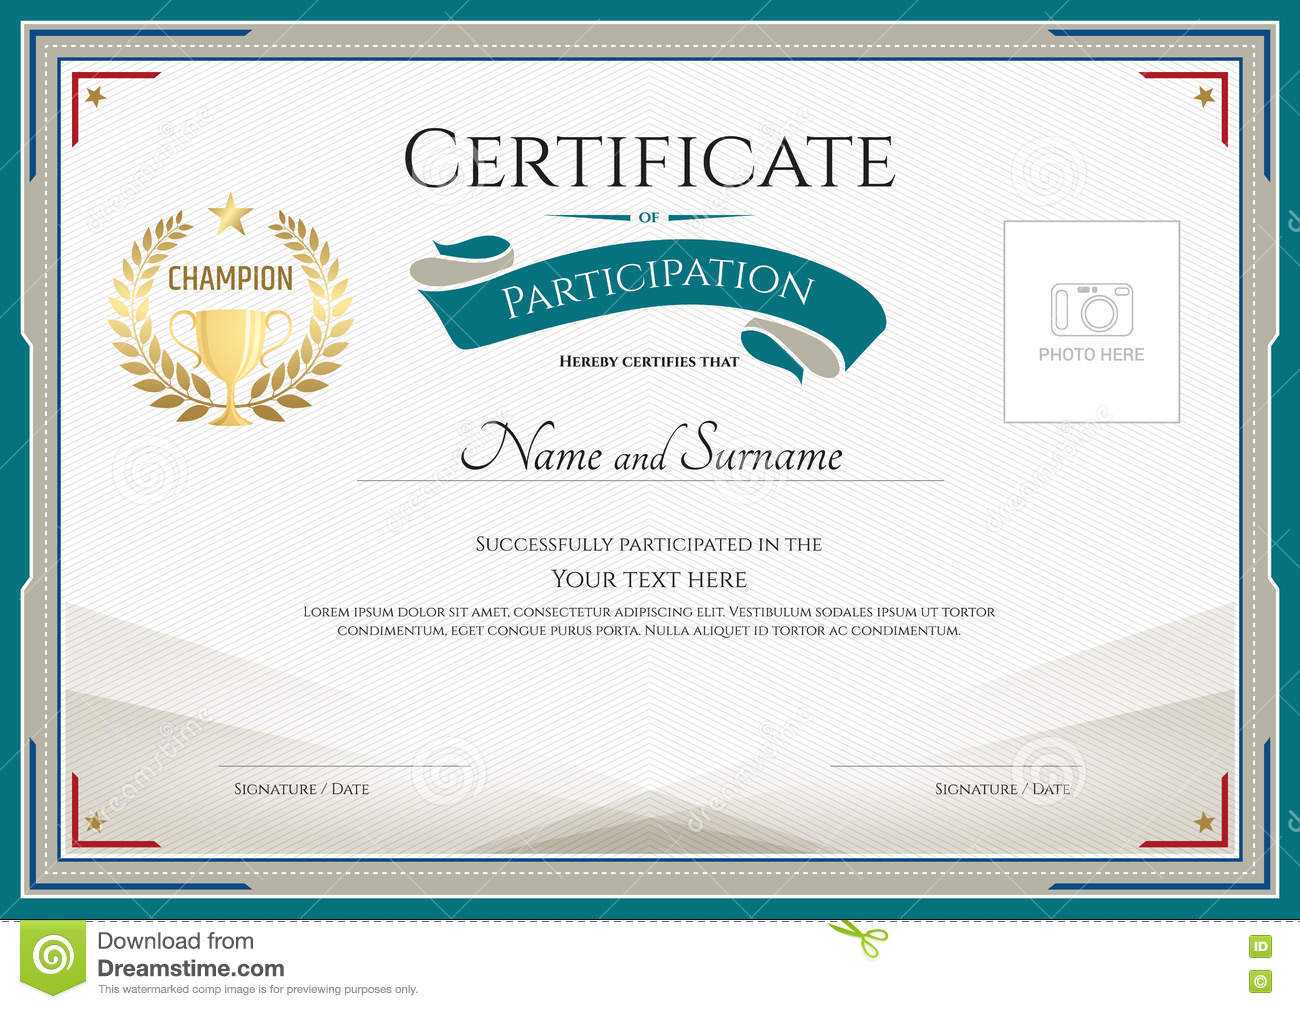 Certificate Of Participation Template With Green Broder With Certificate Of Participation Template Word